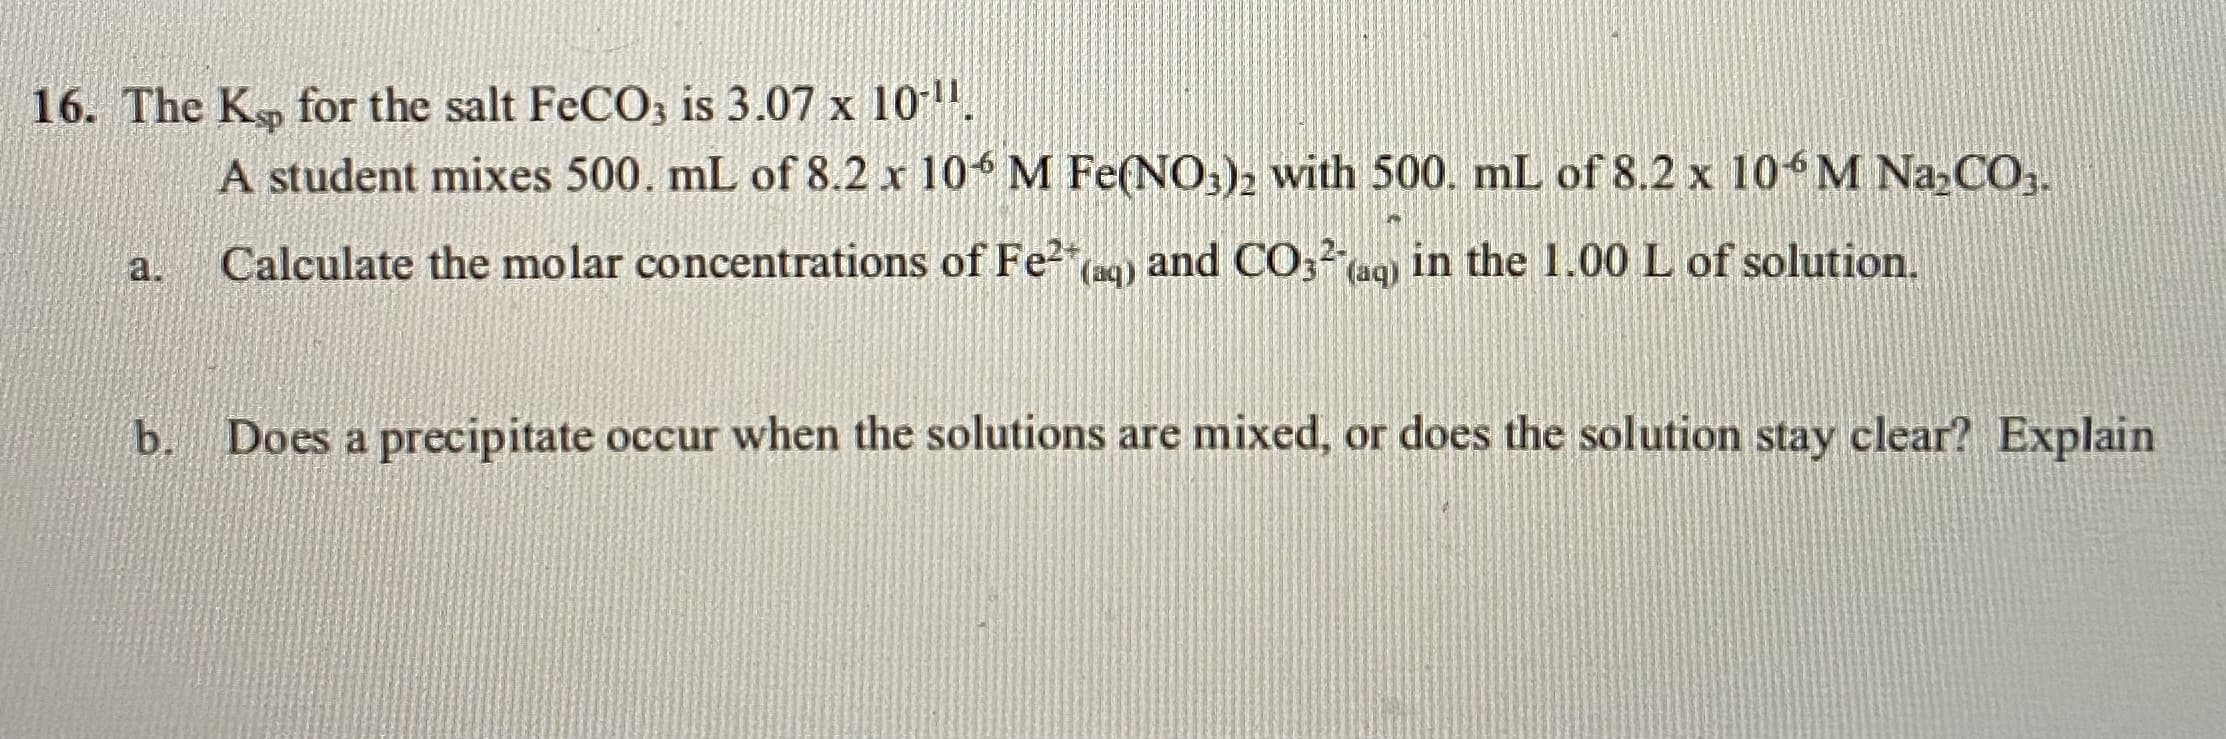 6. The K, for the salt FeCO, is 3.07 x 10.
A student mixes 500. mL of 8.2 x 10 M Fe(NO,), with 500. mL of 8.2 x 10 M Na,CO,.
Calculate the molar concentrations of Fe²"c) and CO;²aq) in the 1.00 L of solution.
a.
b.
Does a precipitate occur when the solutions are mixed, or does the solution stay clear? Explain
